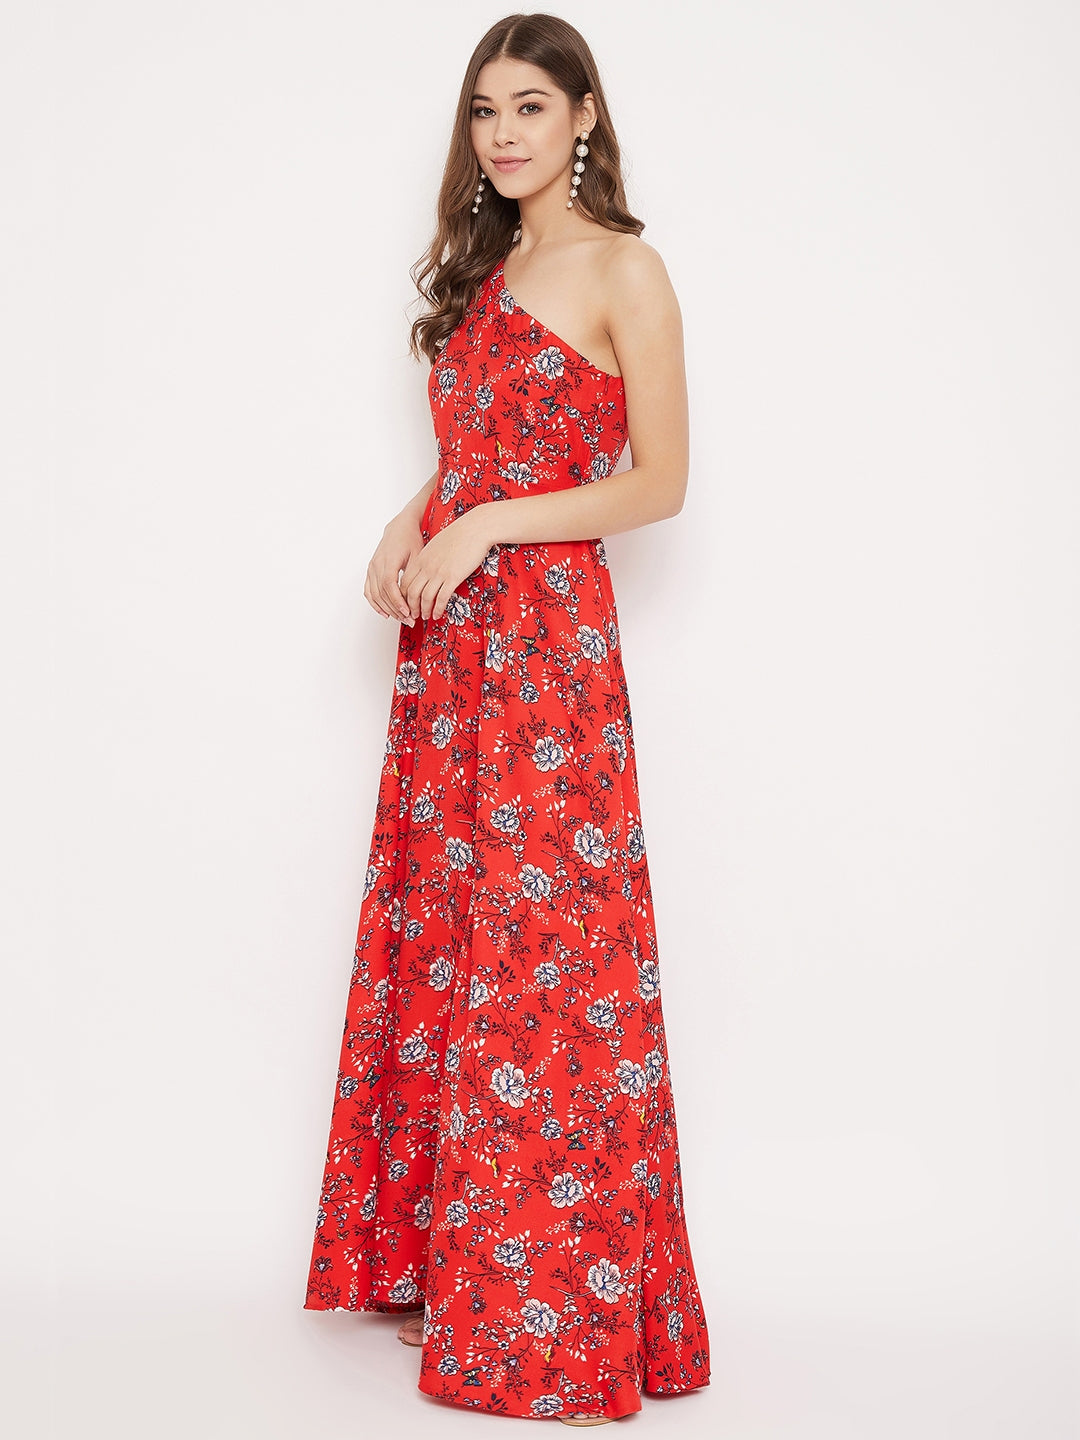 Berrylush Women Red & White Floral Printed One-Shoulder Neck Thigh-High Slit Flared Maxi Dress